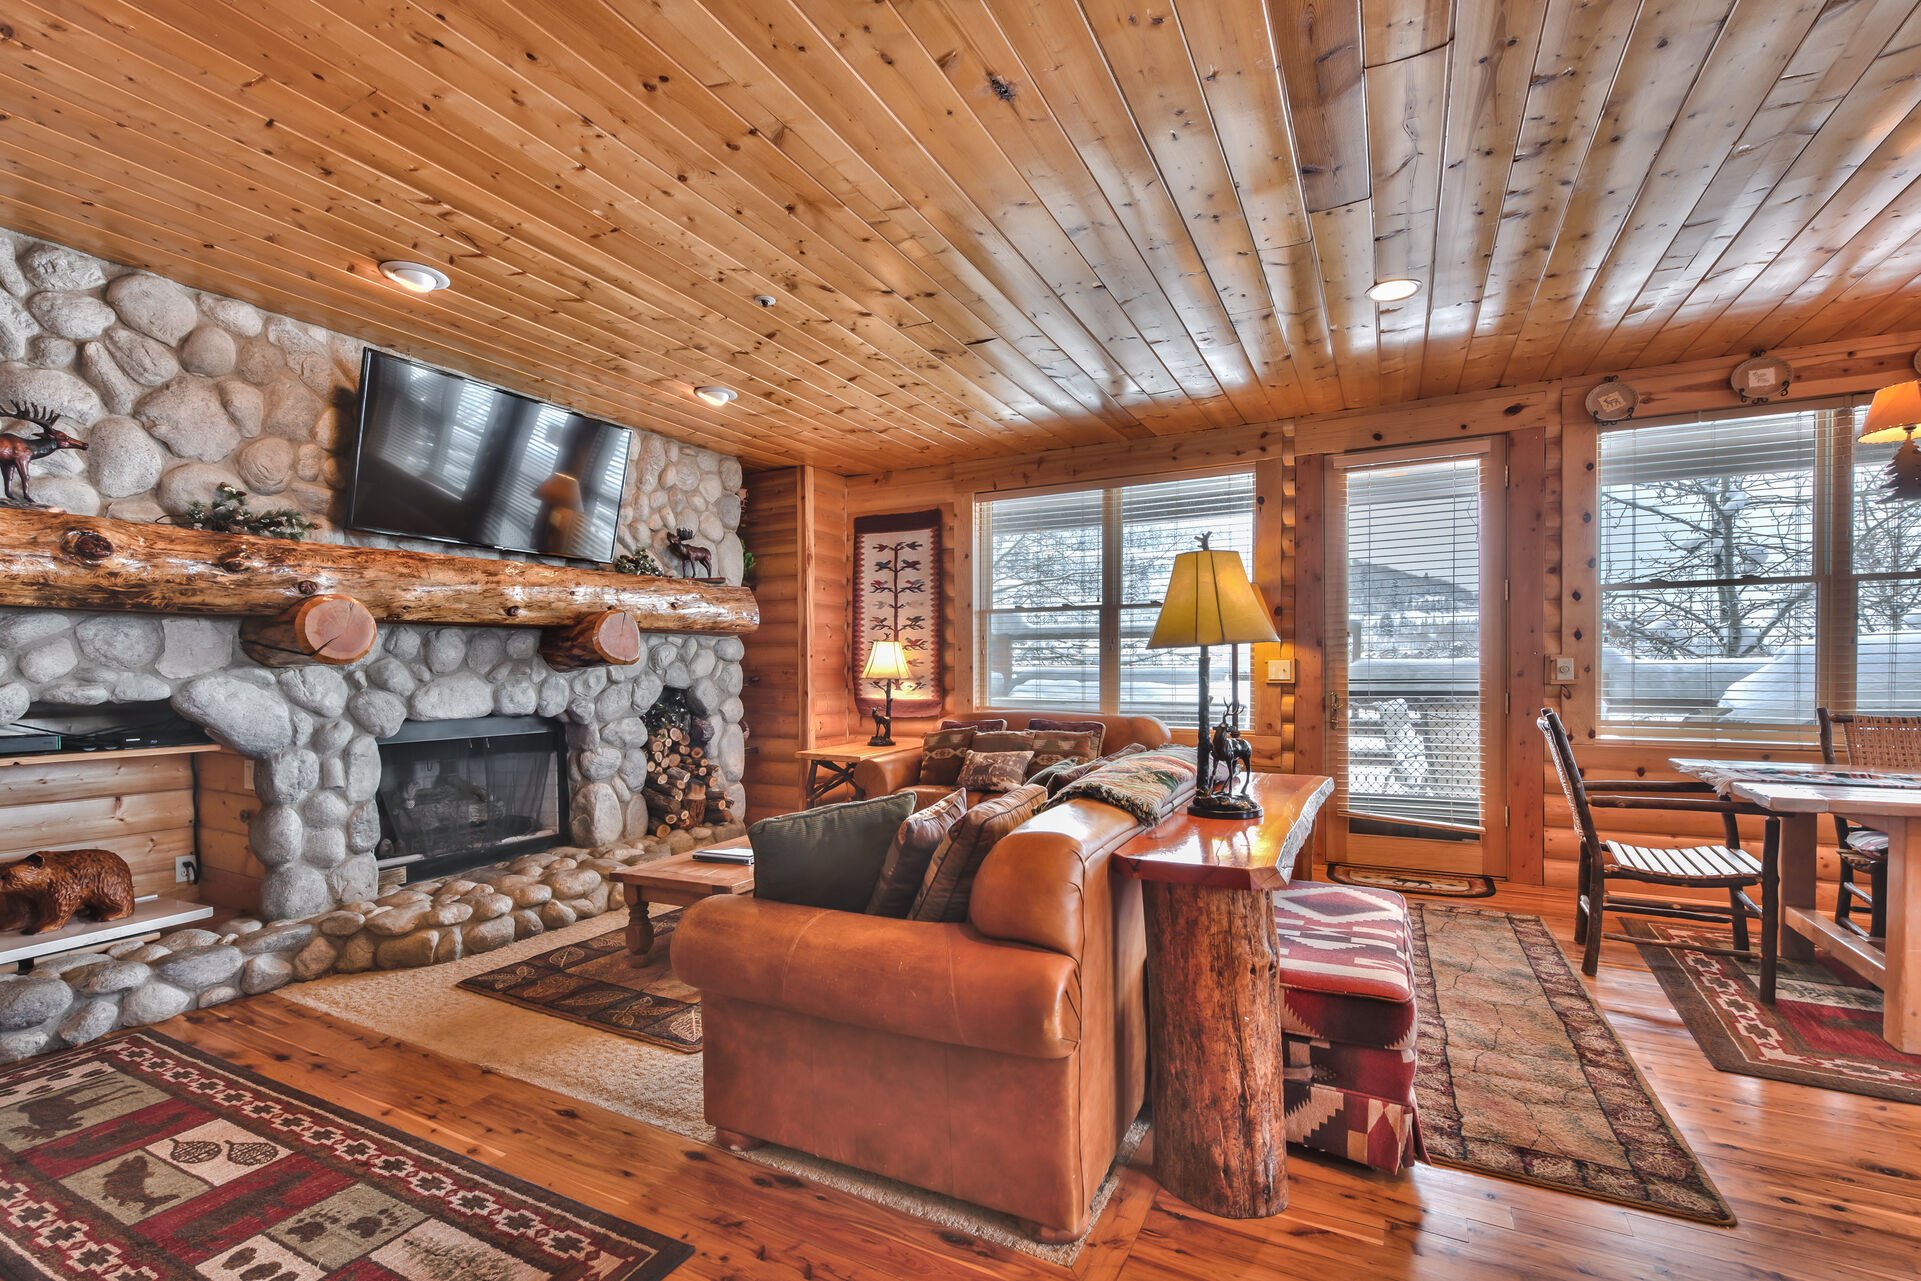 Living Room with Comfortable Mountain Furnishings, a Queen Sleeper Sofa, Stone Fireplace, Flat Screen TV, and Private Deck with Mountain Views